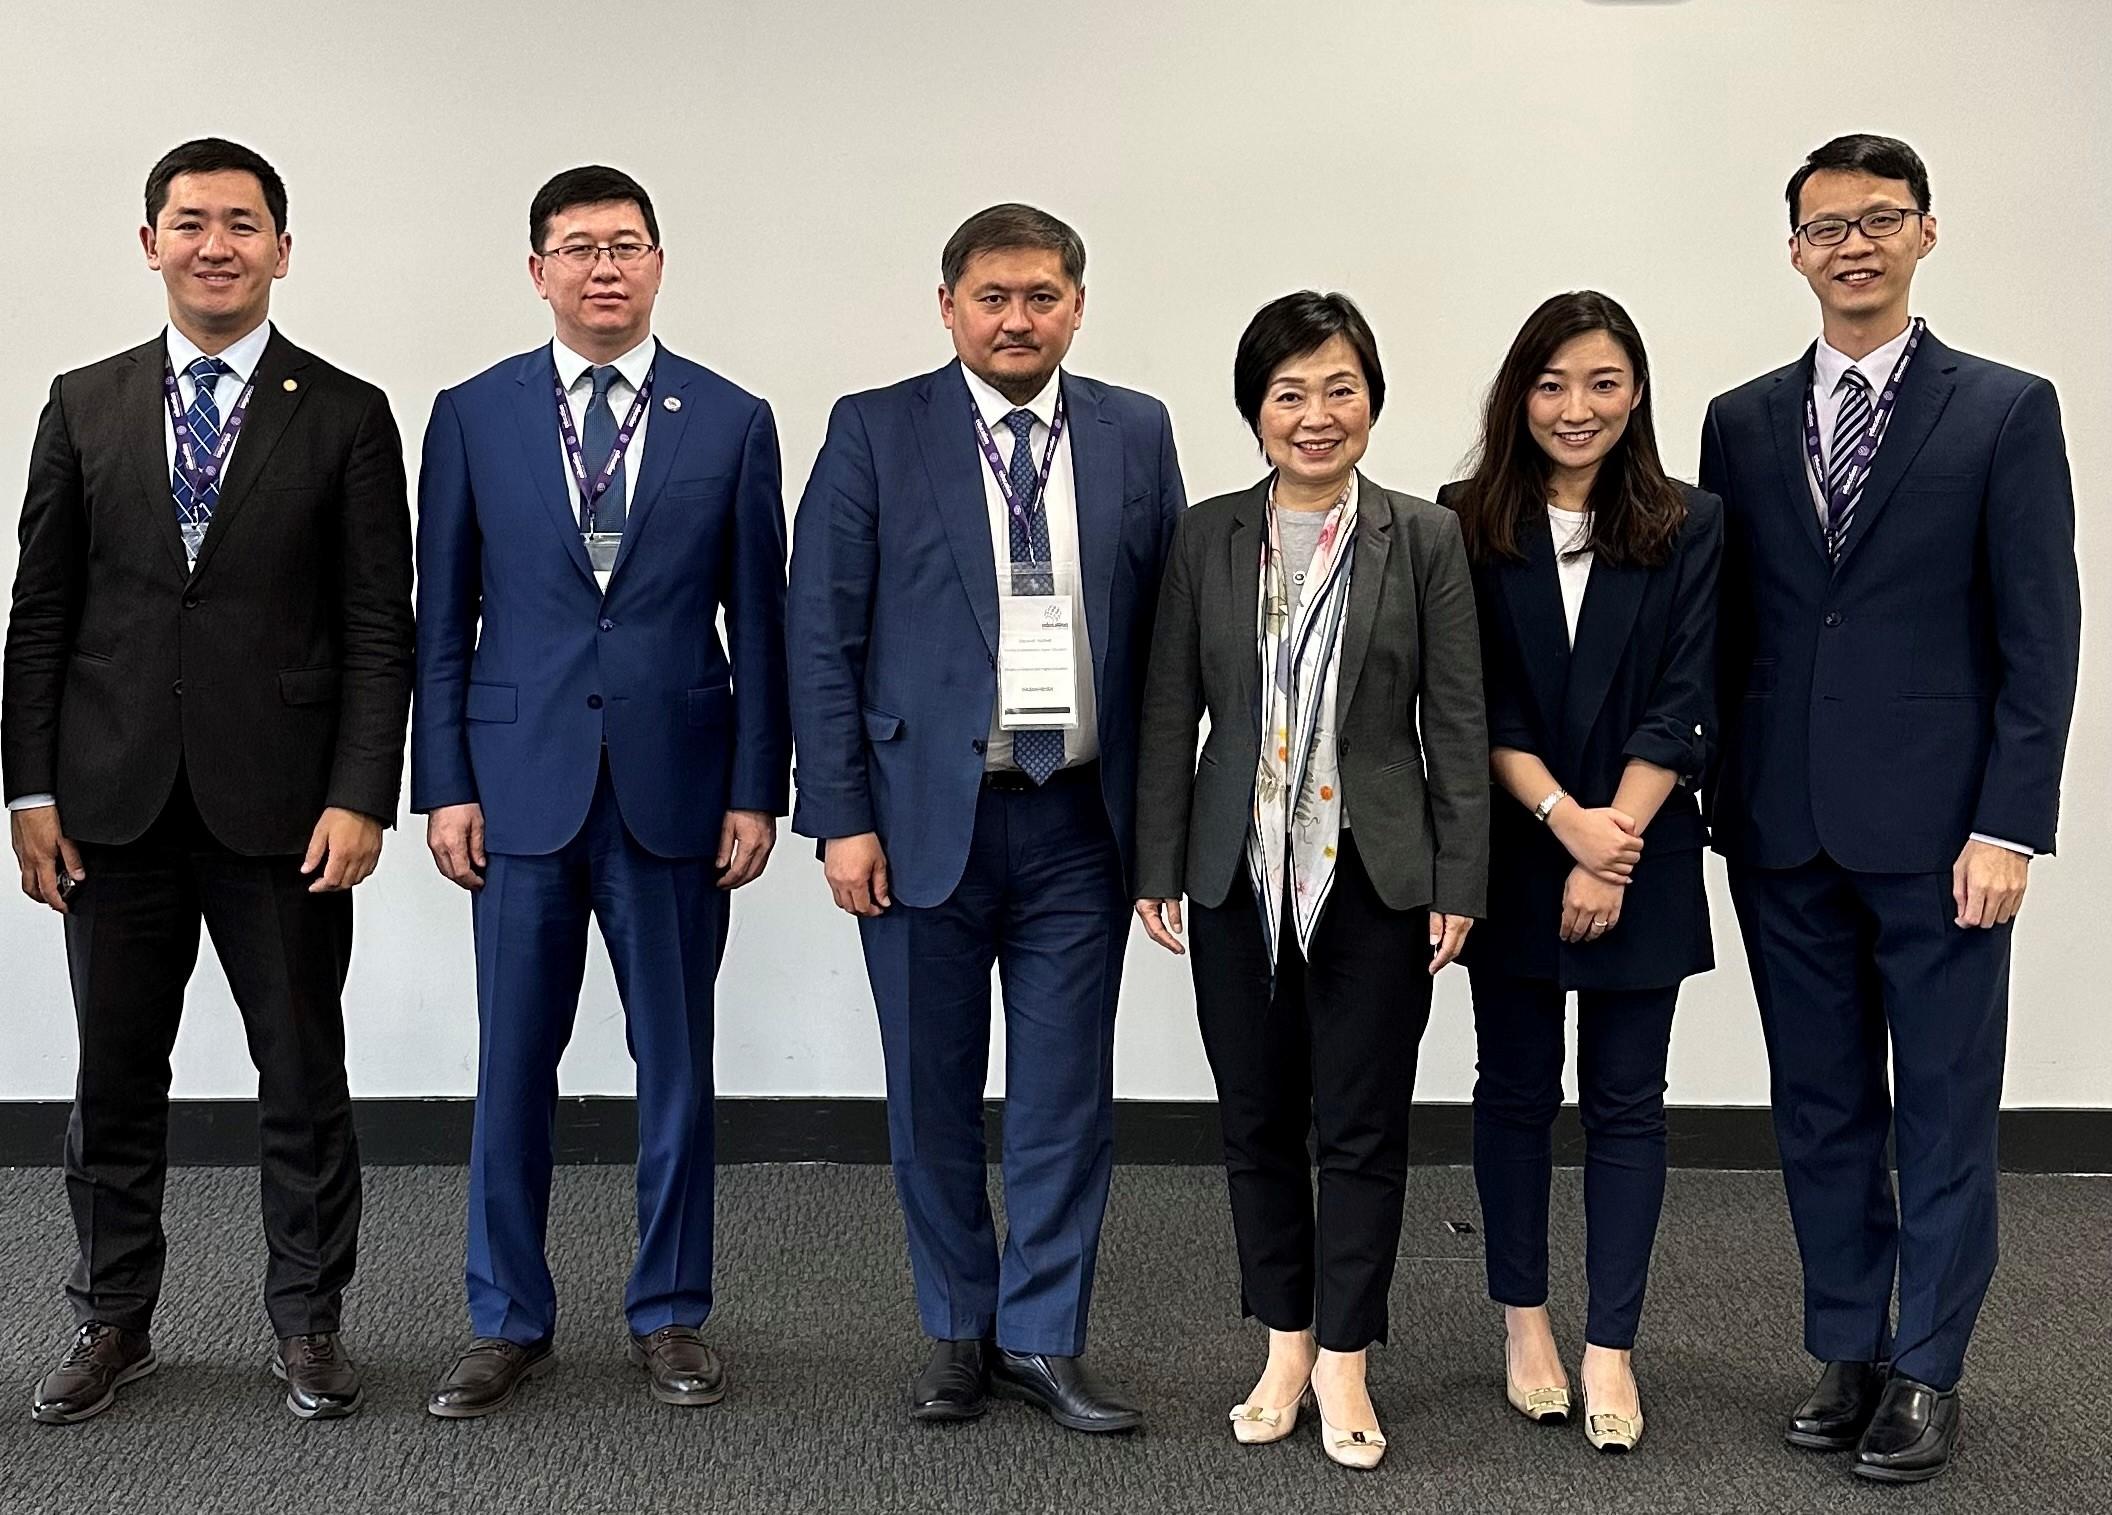 The Secretary for Education, Dr Choi Yuk-lin (third right), meets the Minister of Science and Higher Education of the Republic of Kazakhstan, Mr Nurbek Sayasat (third left), during the Education World Forum in London, the United Kingdom, on May 8 (London time).